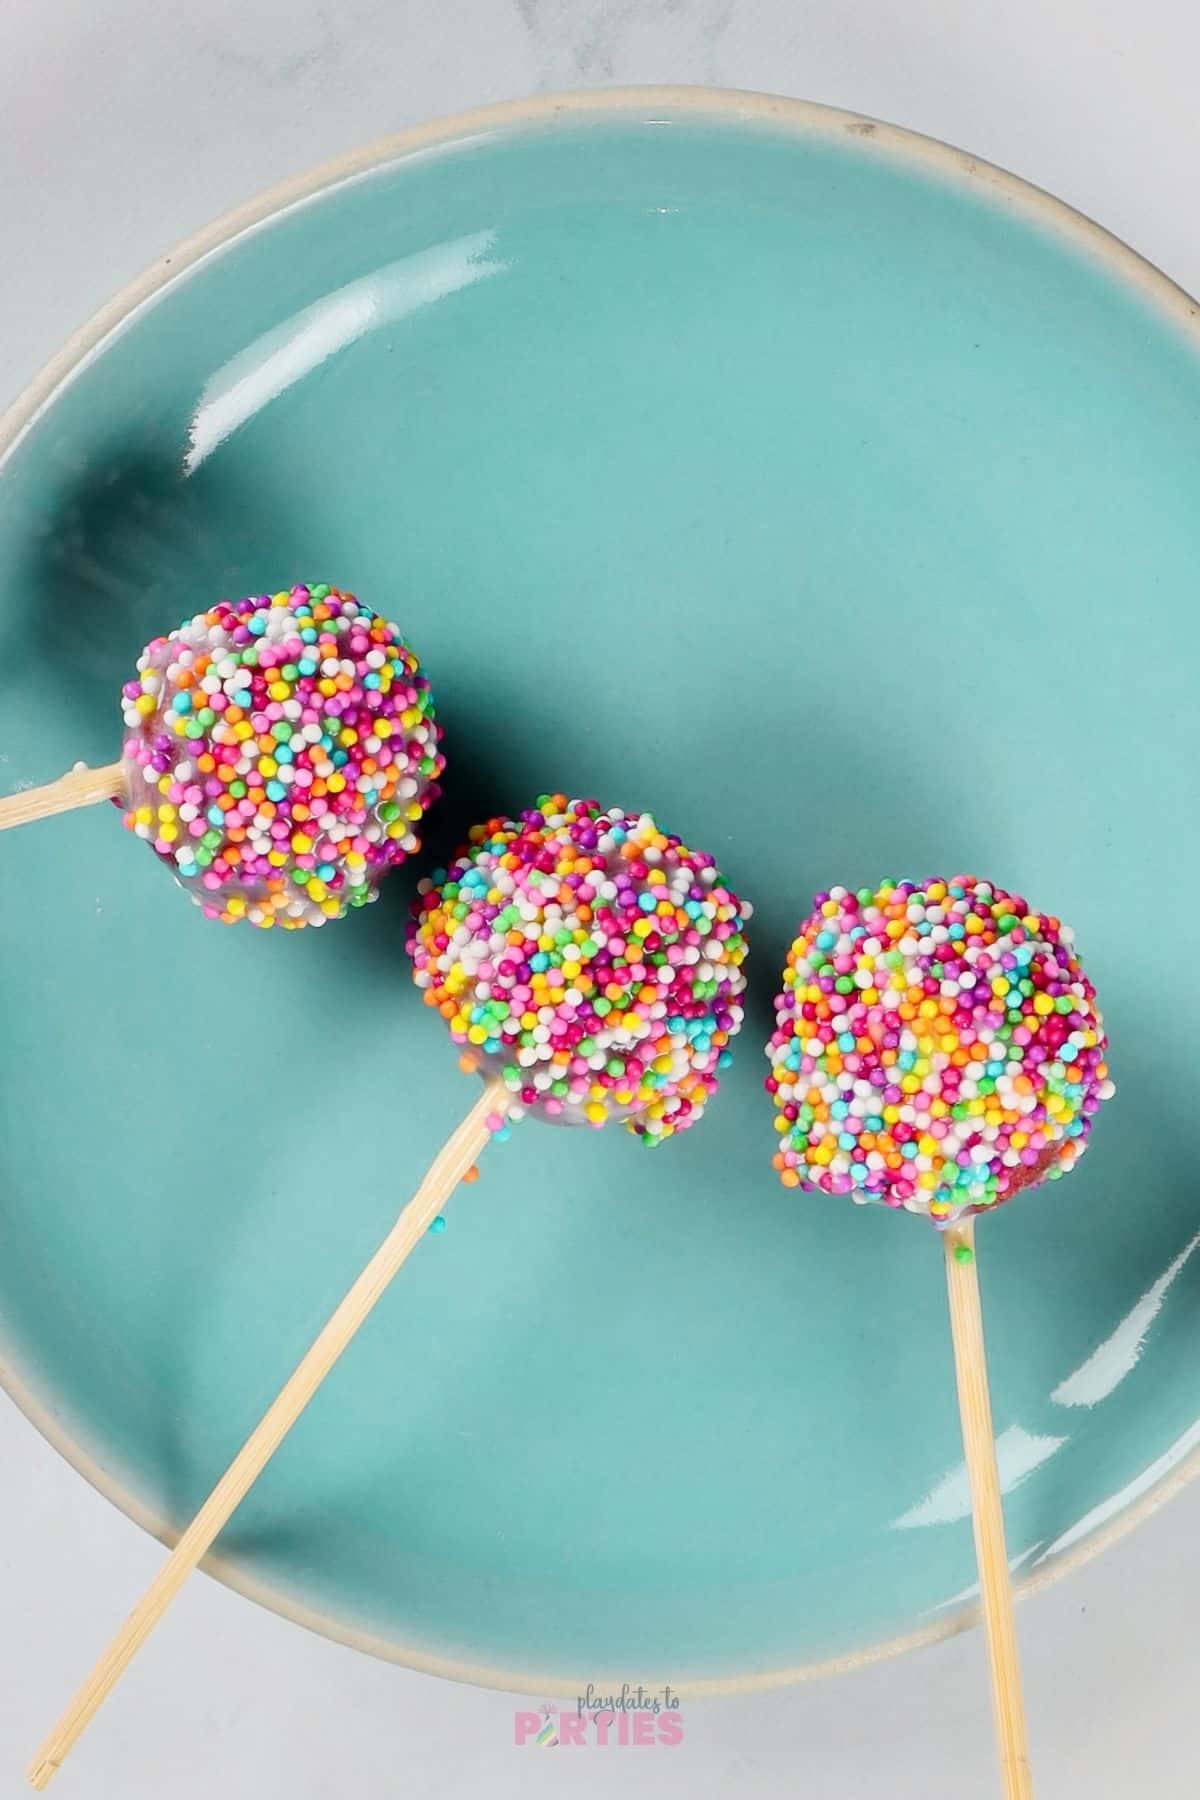 Sprinkle covered cake pops on a blue plate ready for a party.